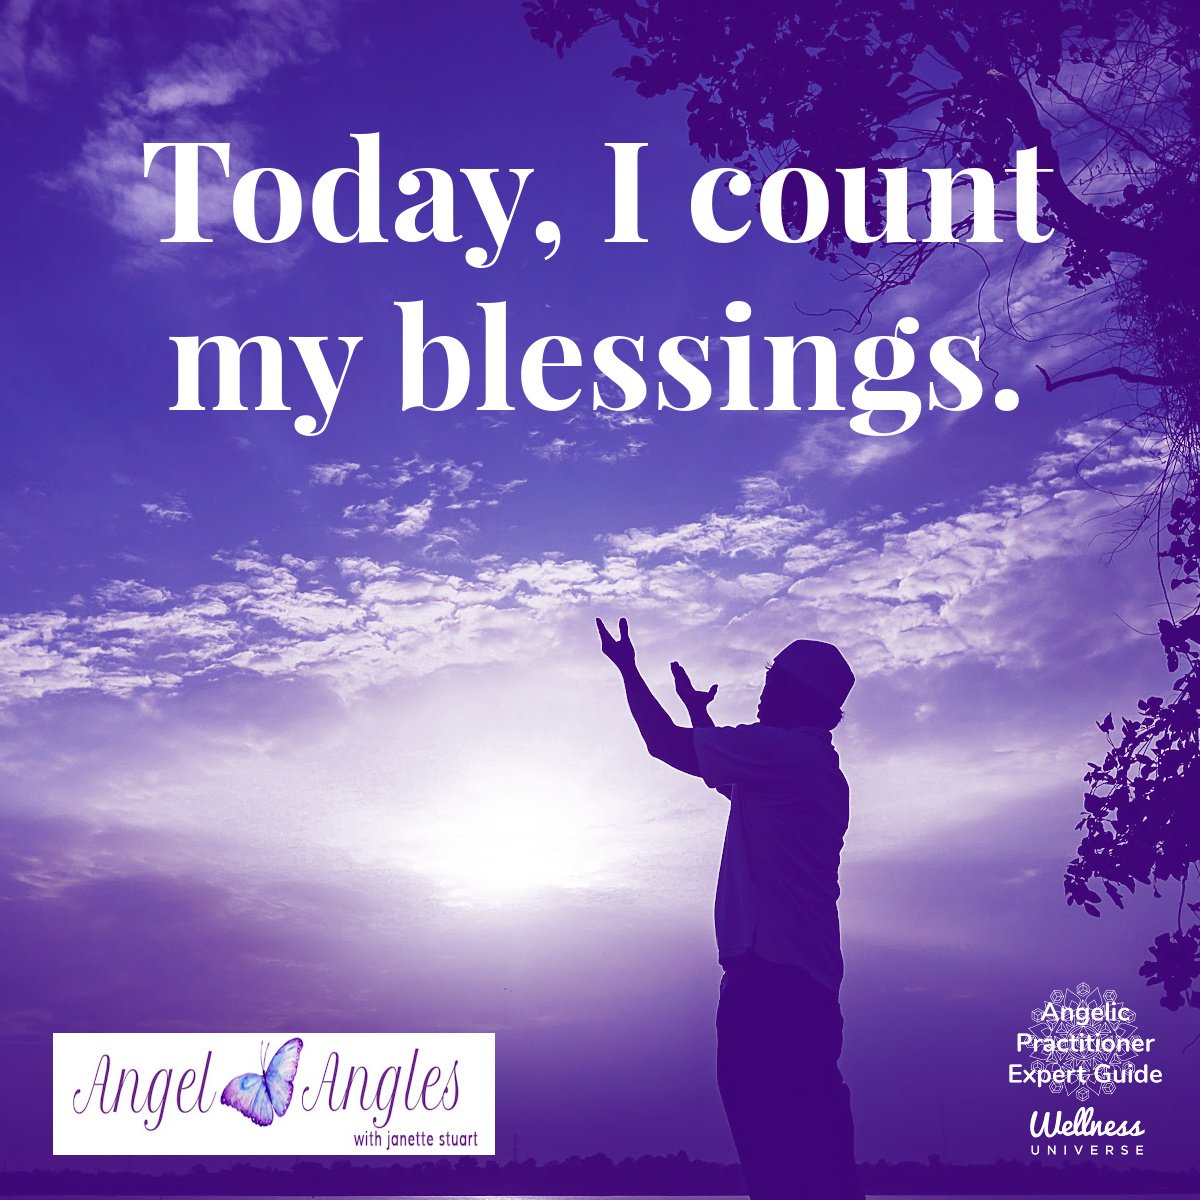 Hello and welcome to your Angel Affirmation for Tues. Apr. 30, 2024, dear heart. 

Today, I count my blessings. Yes! Amen, and so it is. 

Blessings of love, joy, and peace.
Love,
Janette 
.
.
#WUVIP #WUWorldChanger #AngelAffirmations #CountYourBless